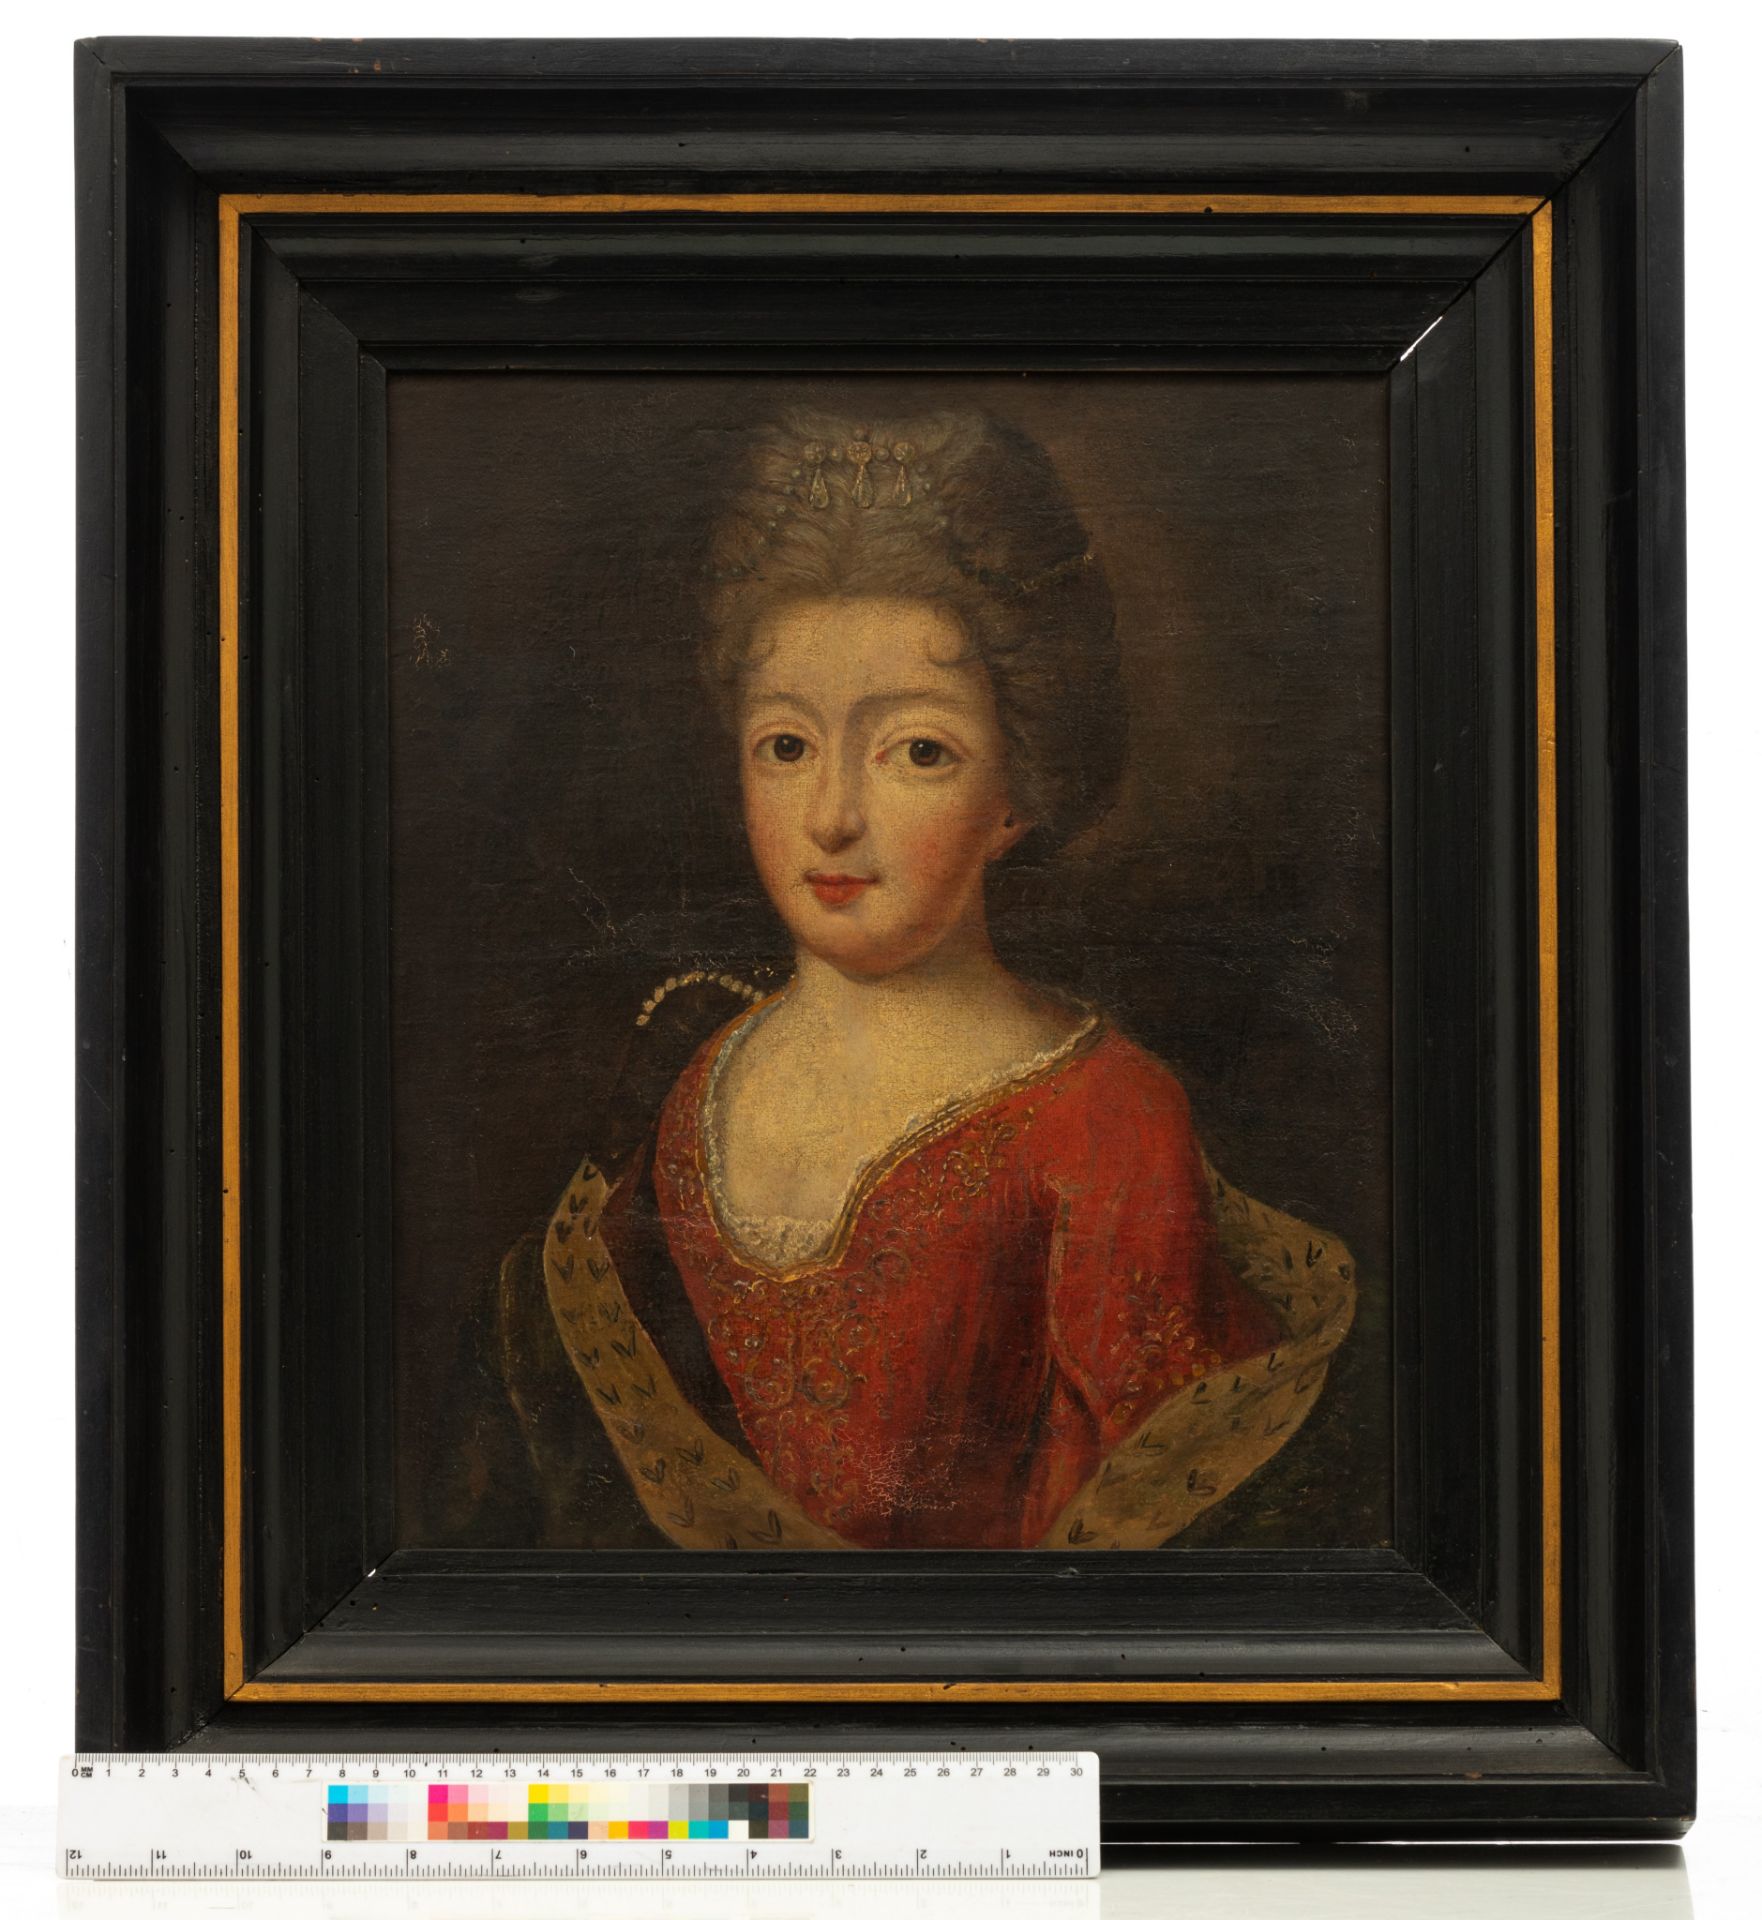 The portrait of a noble lady, 18thC, 32 x 39 cm - Image 13 of 13